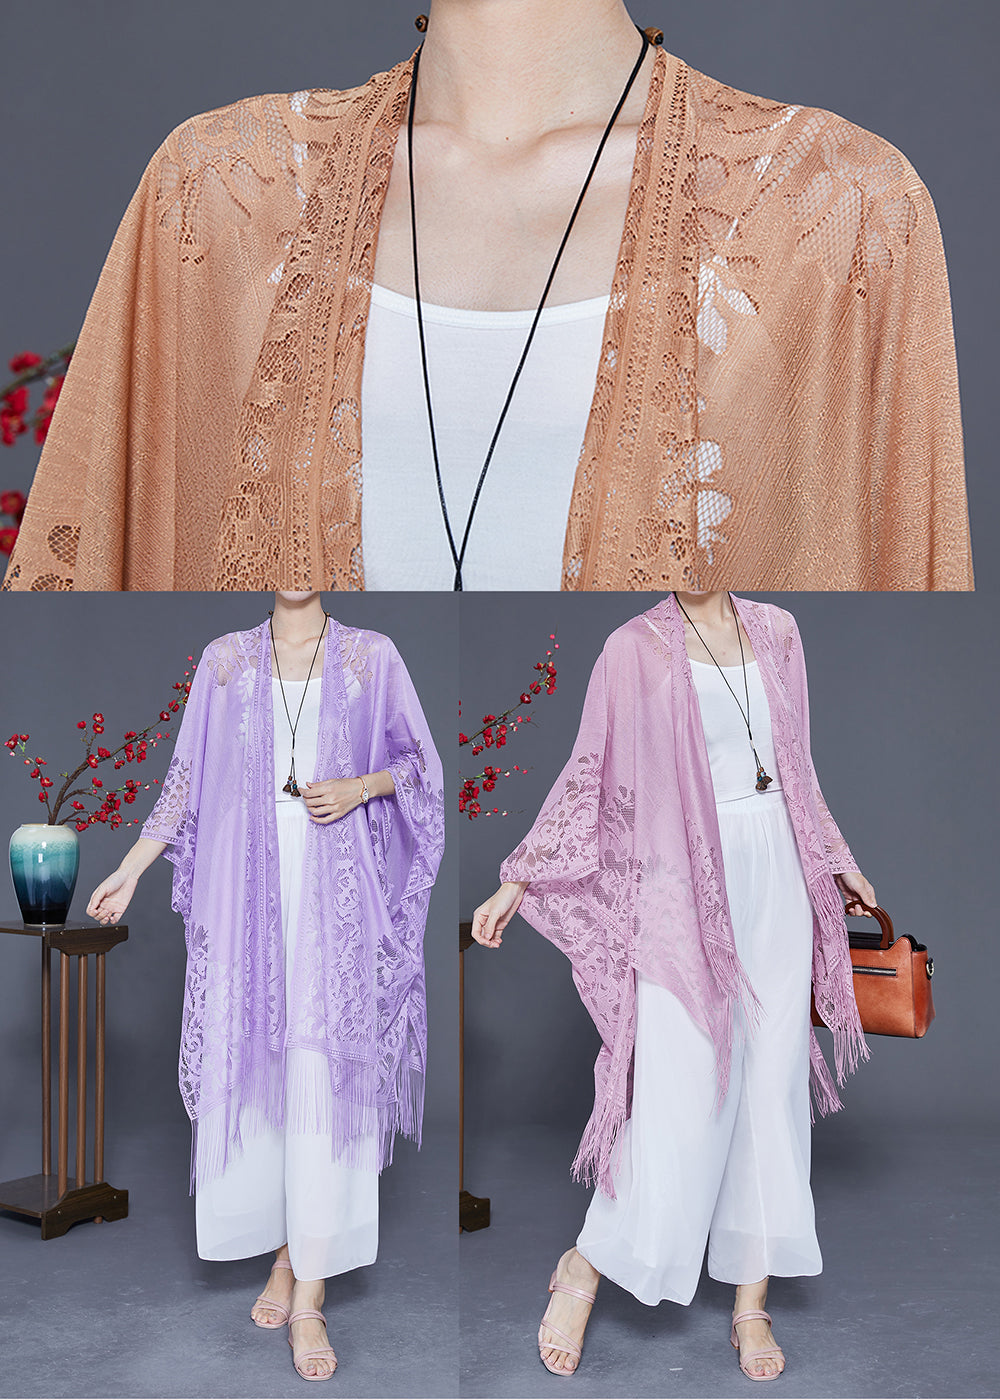 Style Light Purple Hollow Out Tasseled Lace Scarf LY2362 - fabuloryshop